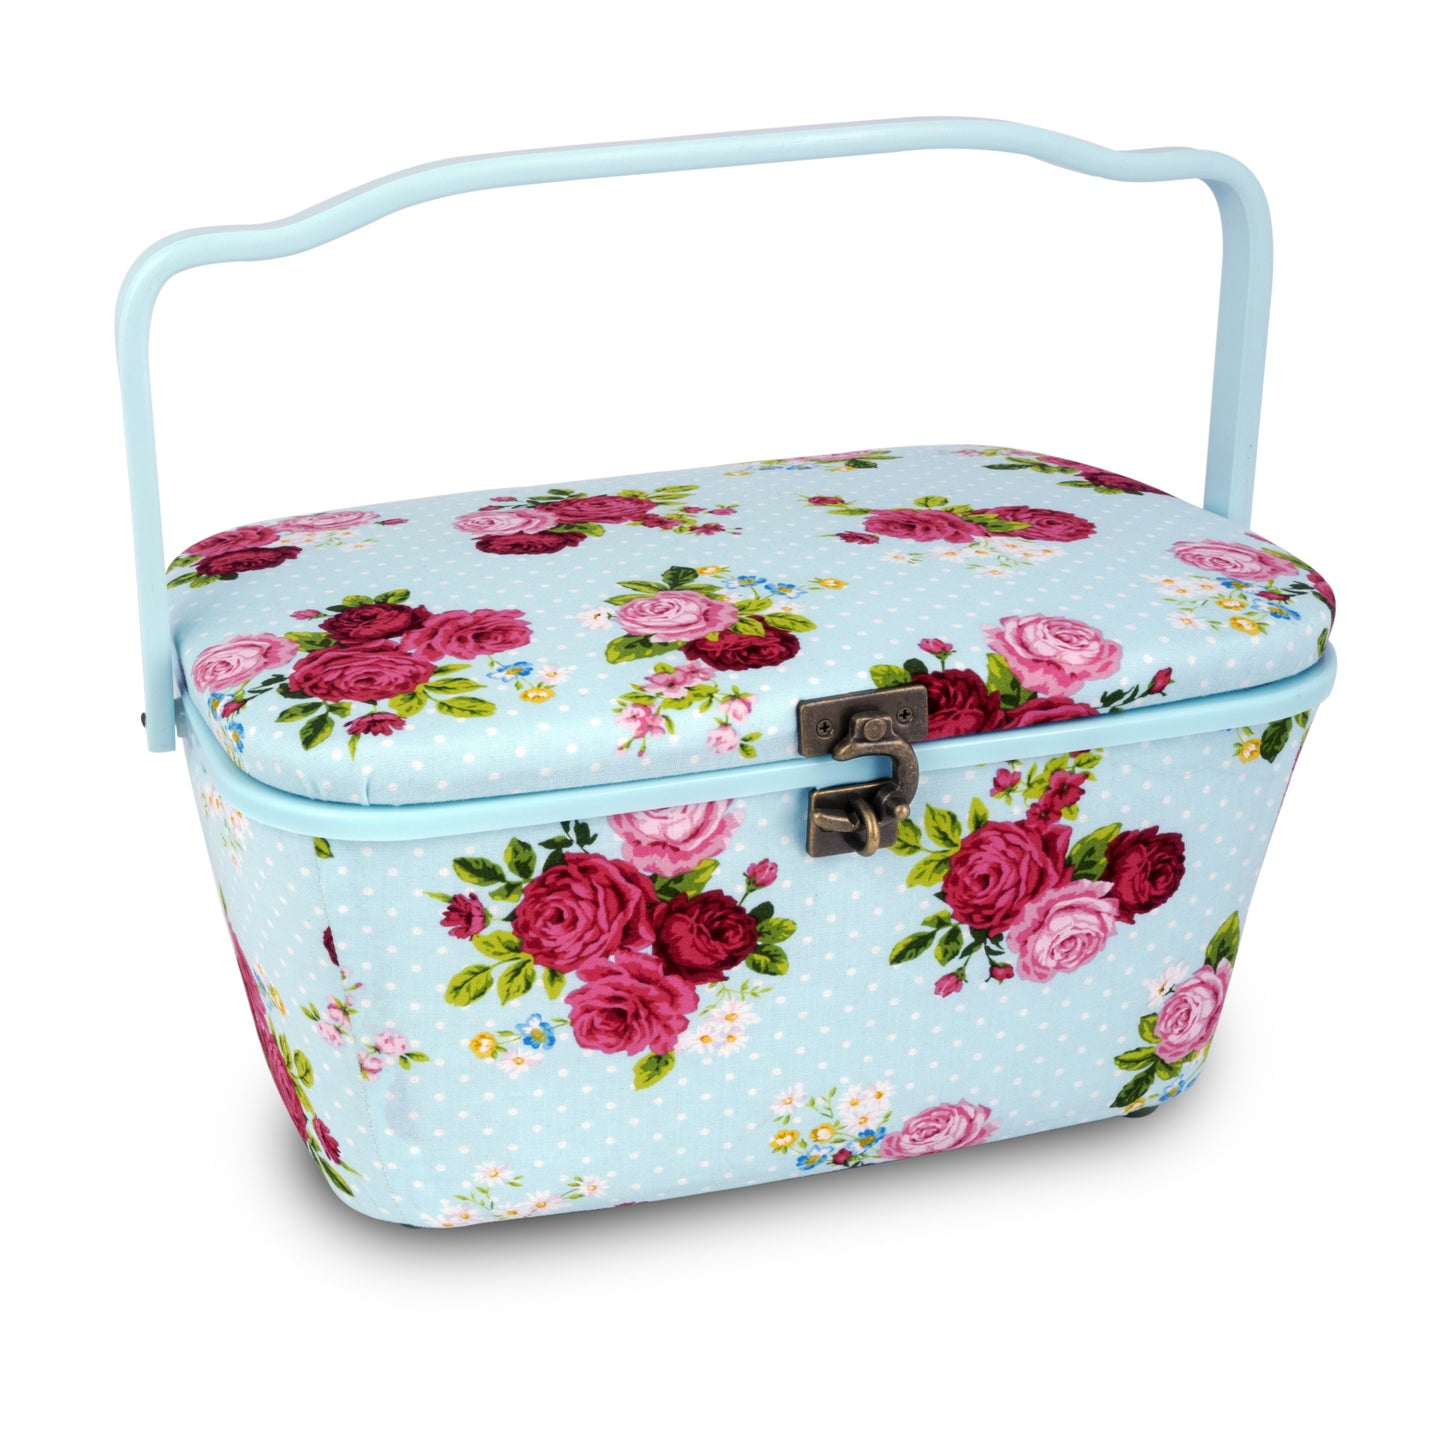 Our Dritz Oval Sewing Basket, XL Sewing Baskets & Storage are of good  quality, low price, high quality and quantity